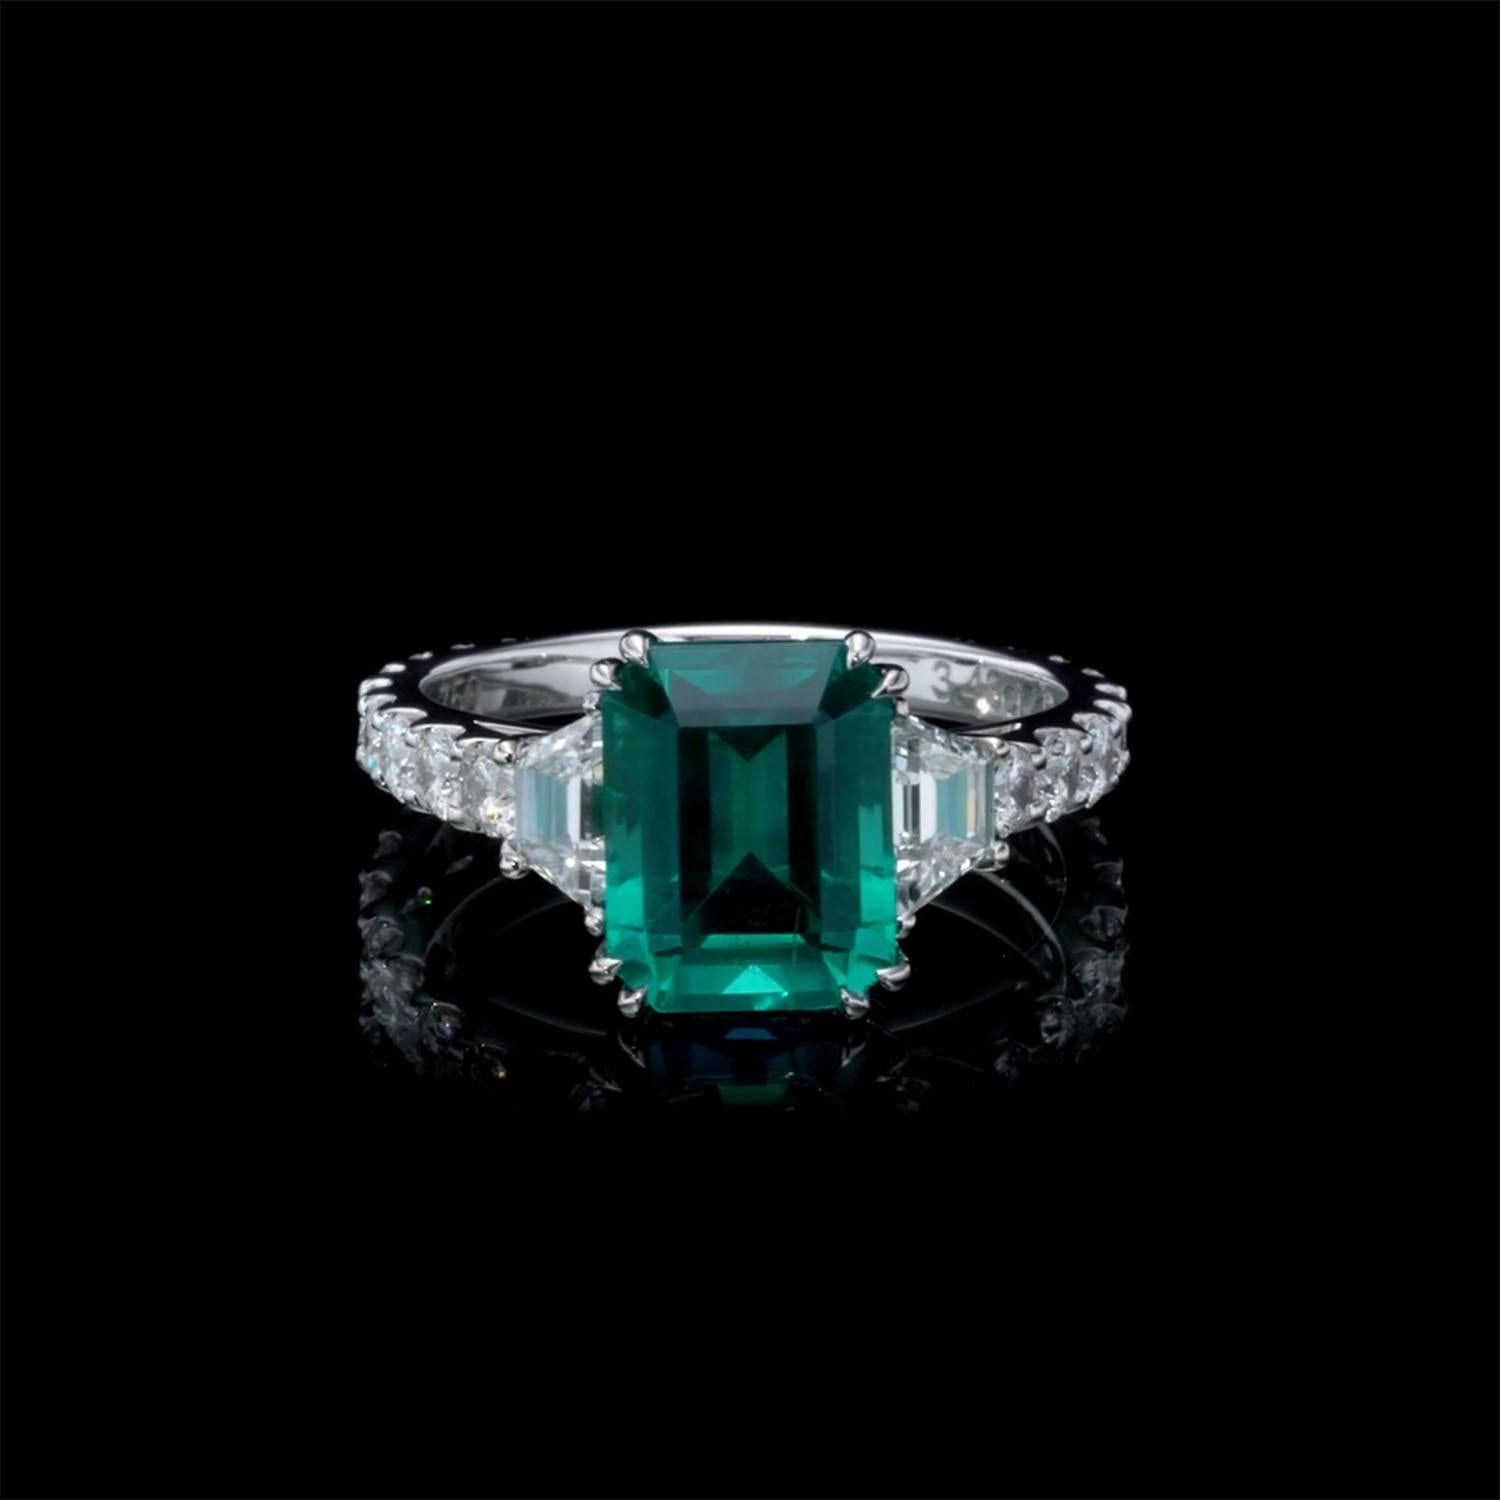 The verdant green of rare natural emerald, the smooth, radiant beauty of pure gold, and the sparkling white of natural diamonds come together in Maia- a wearable work of art. This luxury natural emerald diamond ring brings a lush touch of color to